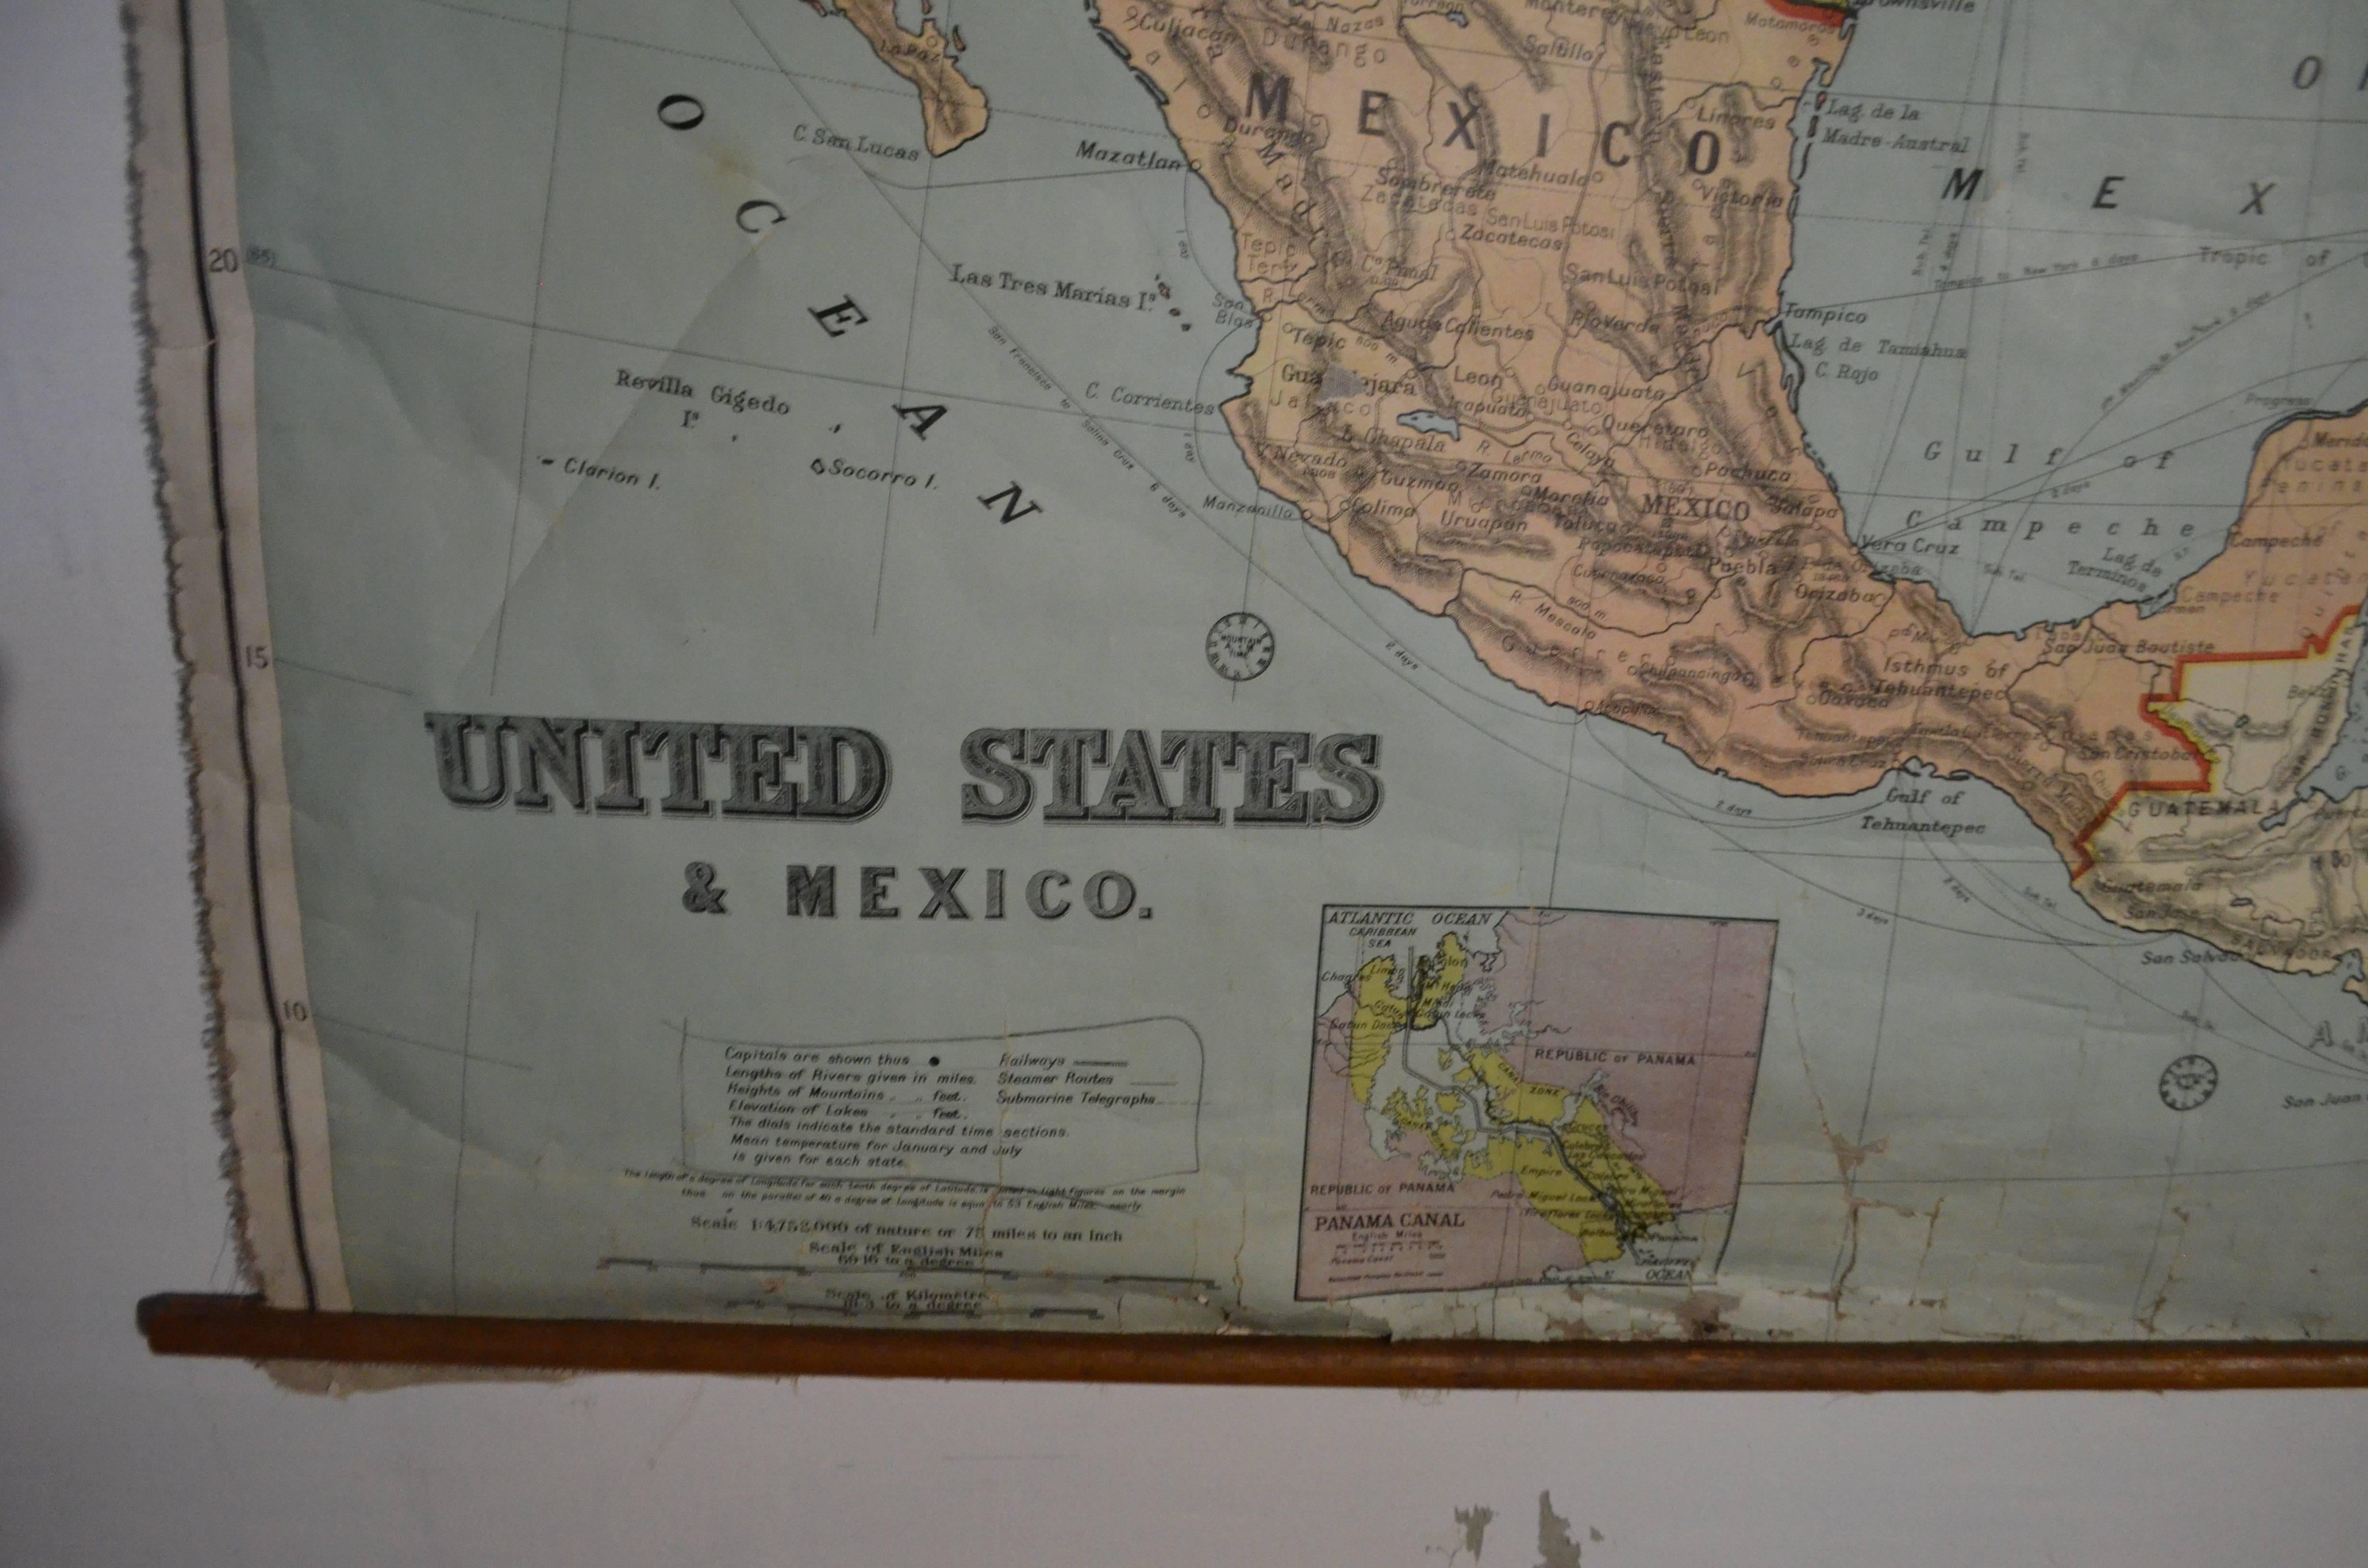 Scottish Early 20th Century Map of the United States and Mexico, 1916 Edition